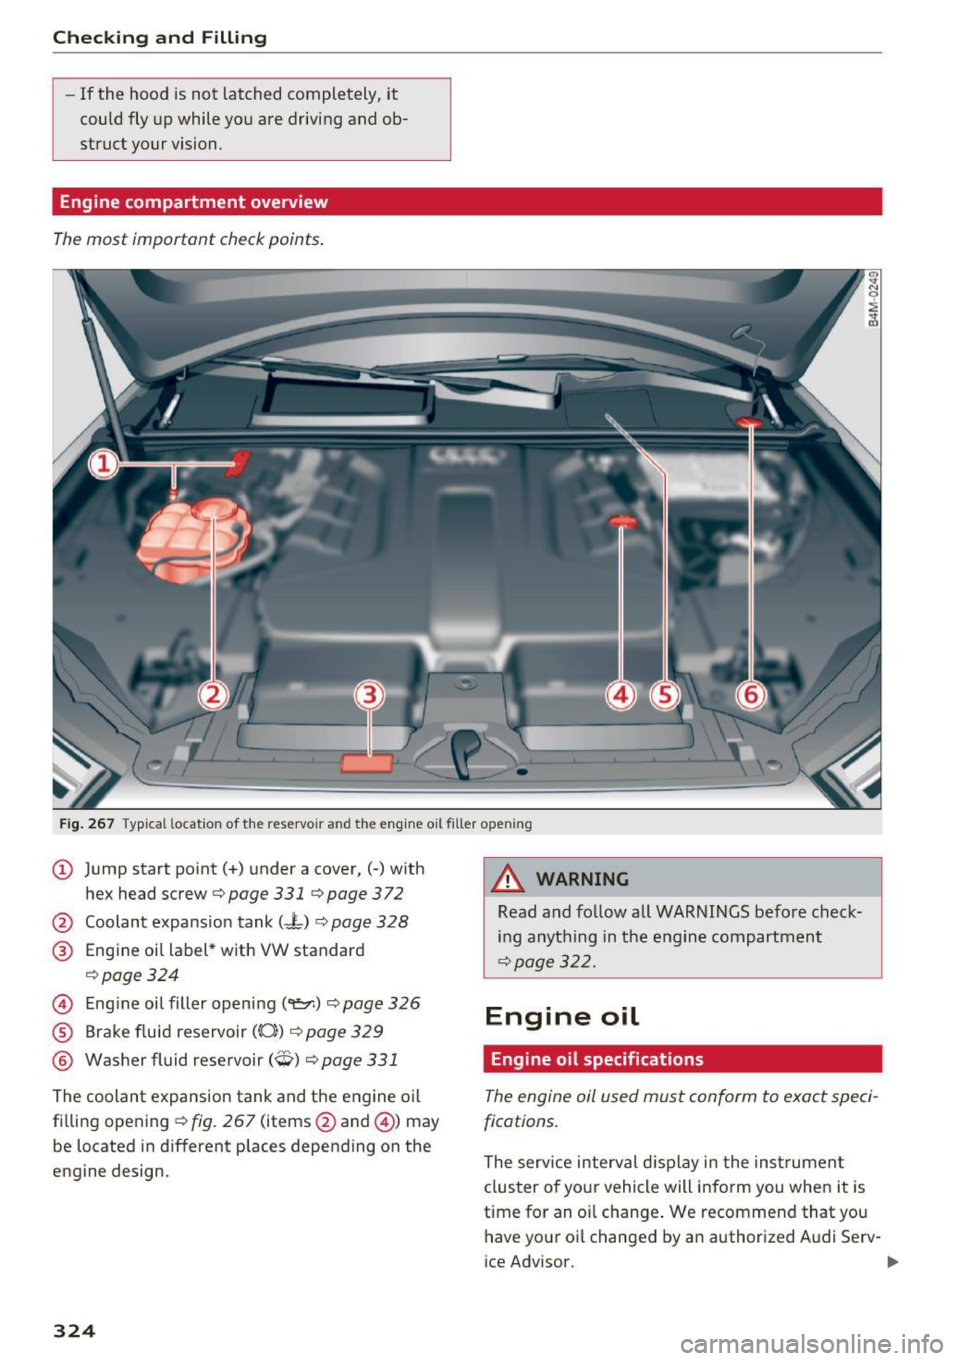 AUDI Q7 2017  Owner´s Manual Checking  and  Filling 
-If  the  hood  is not  latched  completely,  it 
could  fly  up  while  you  are  driving  and  ob­
struct  your  vision. 
Engine compartment  overview 
The most  important  